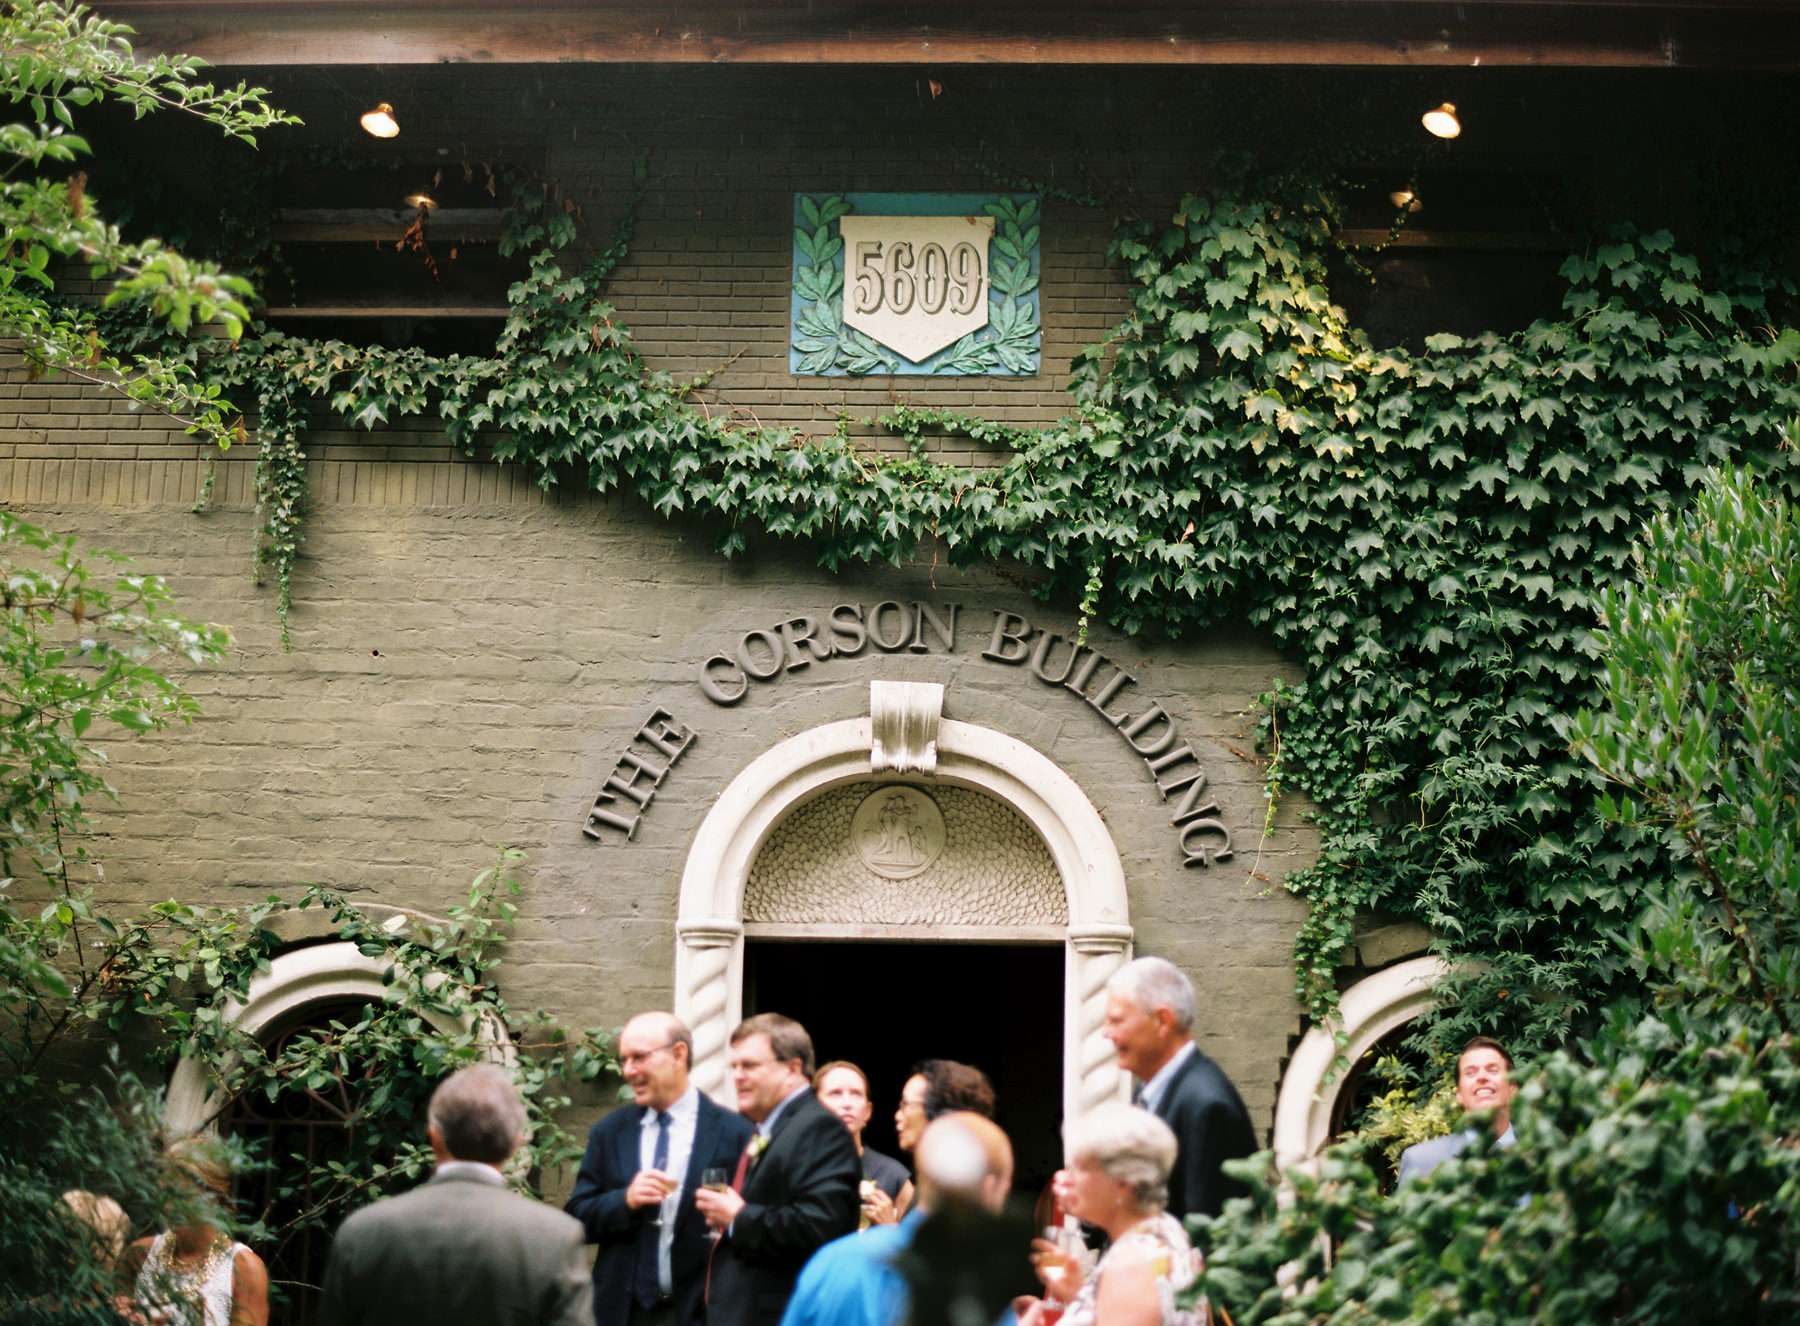 193-outdoor-wedding-at-the-corson-building-in-georgetown-seattle.jpg